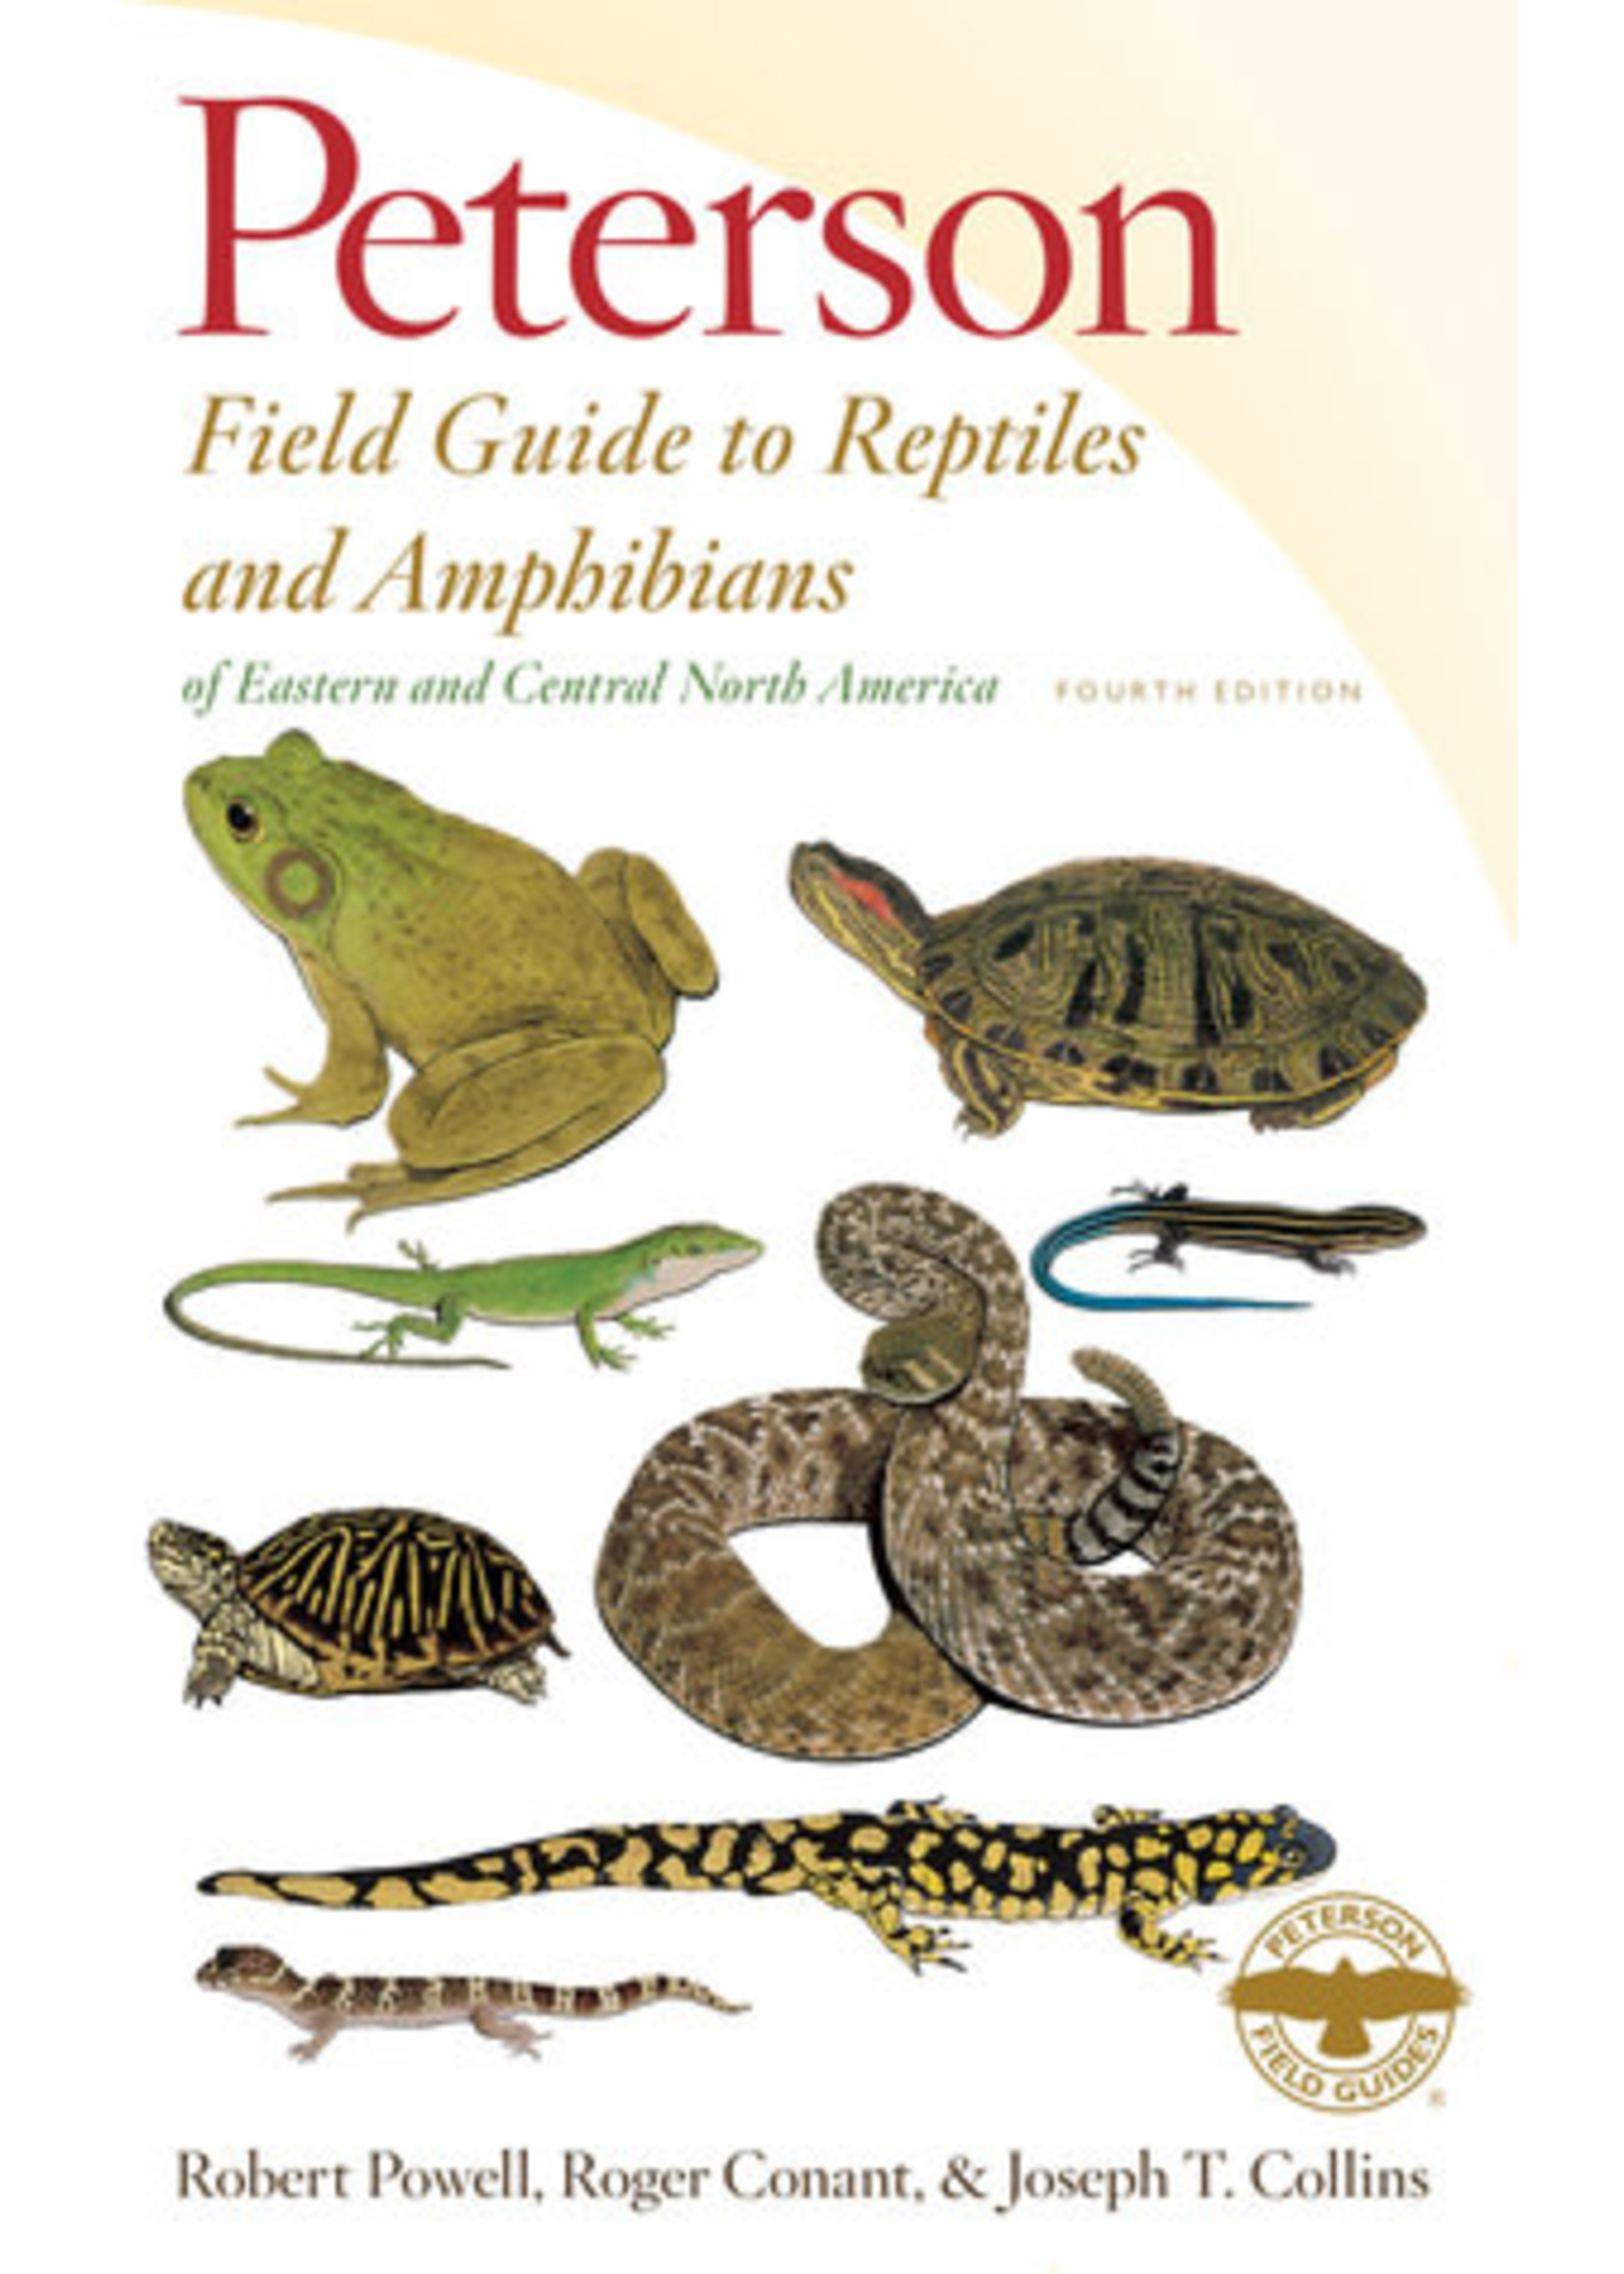 Peterson Field Guide to Reptiles and Amphibians Eastern Central North America (Peterson Field Guides #12) by Robert Powell, Roger Conant, Joseph T. Collins